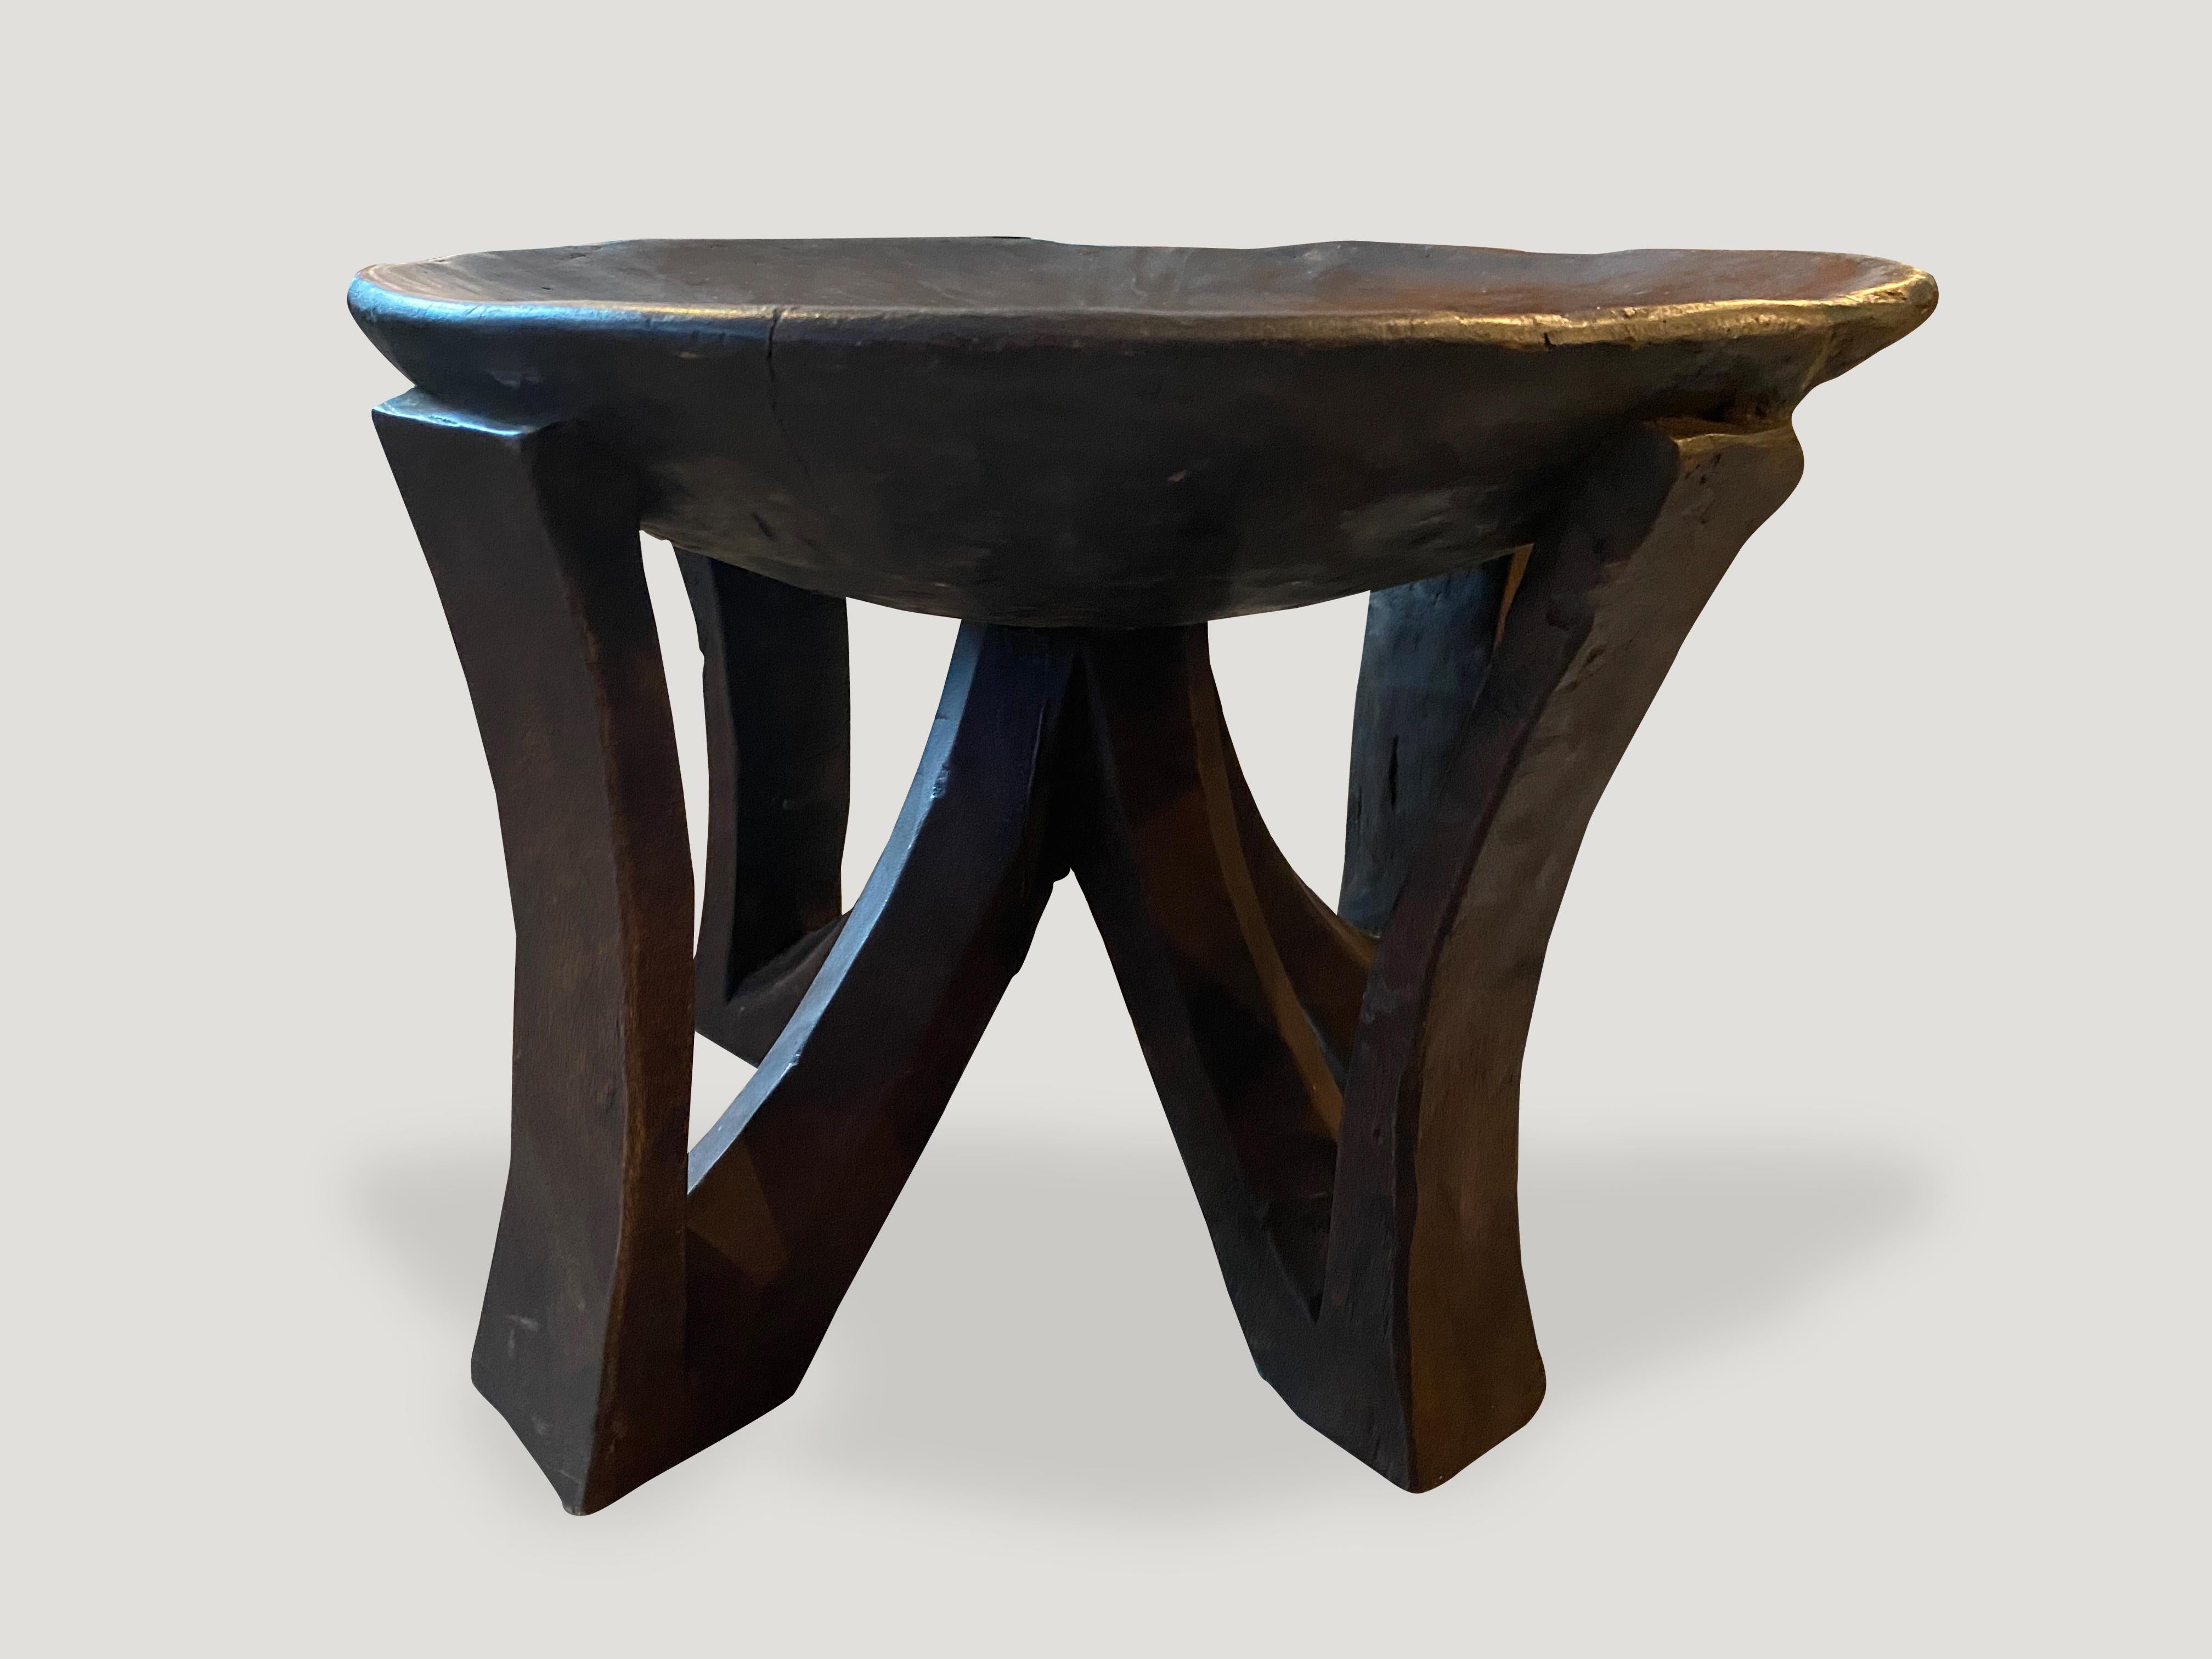 Tribal Antique Mahogany Wood African Sculptural Side Table or Bowl